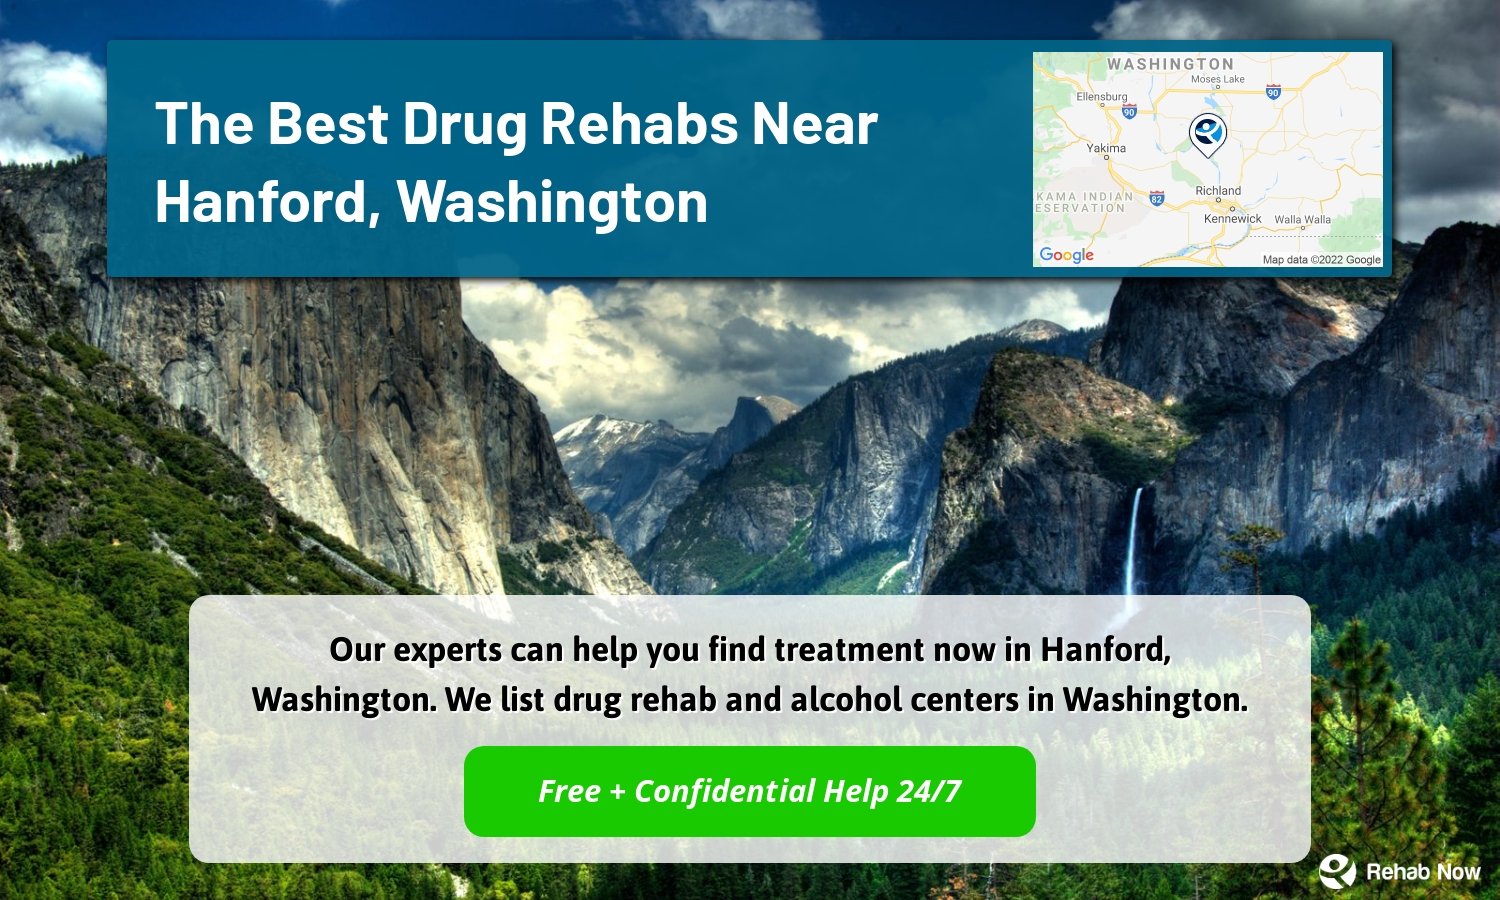 Our experts can help you find treatment now in Hanford, Washington. We list drug rehab and alcohol centers in Washington.